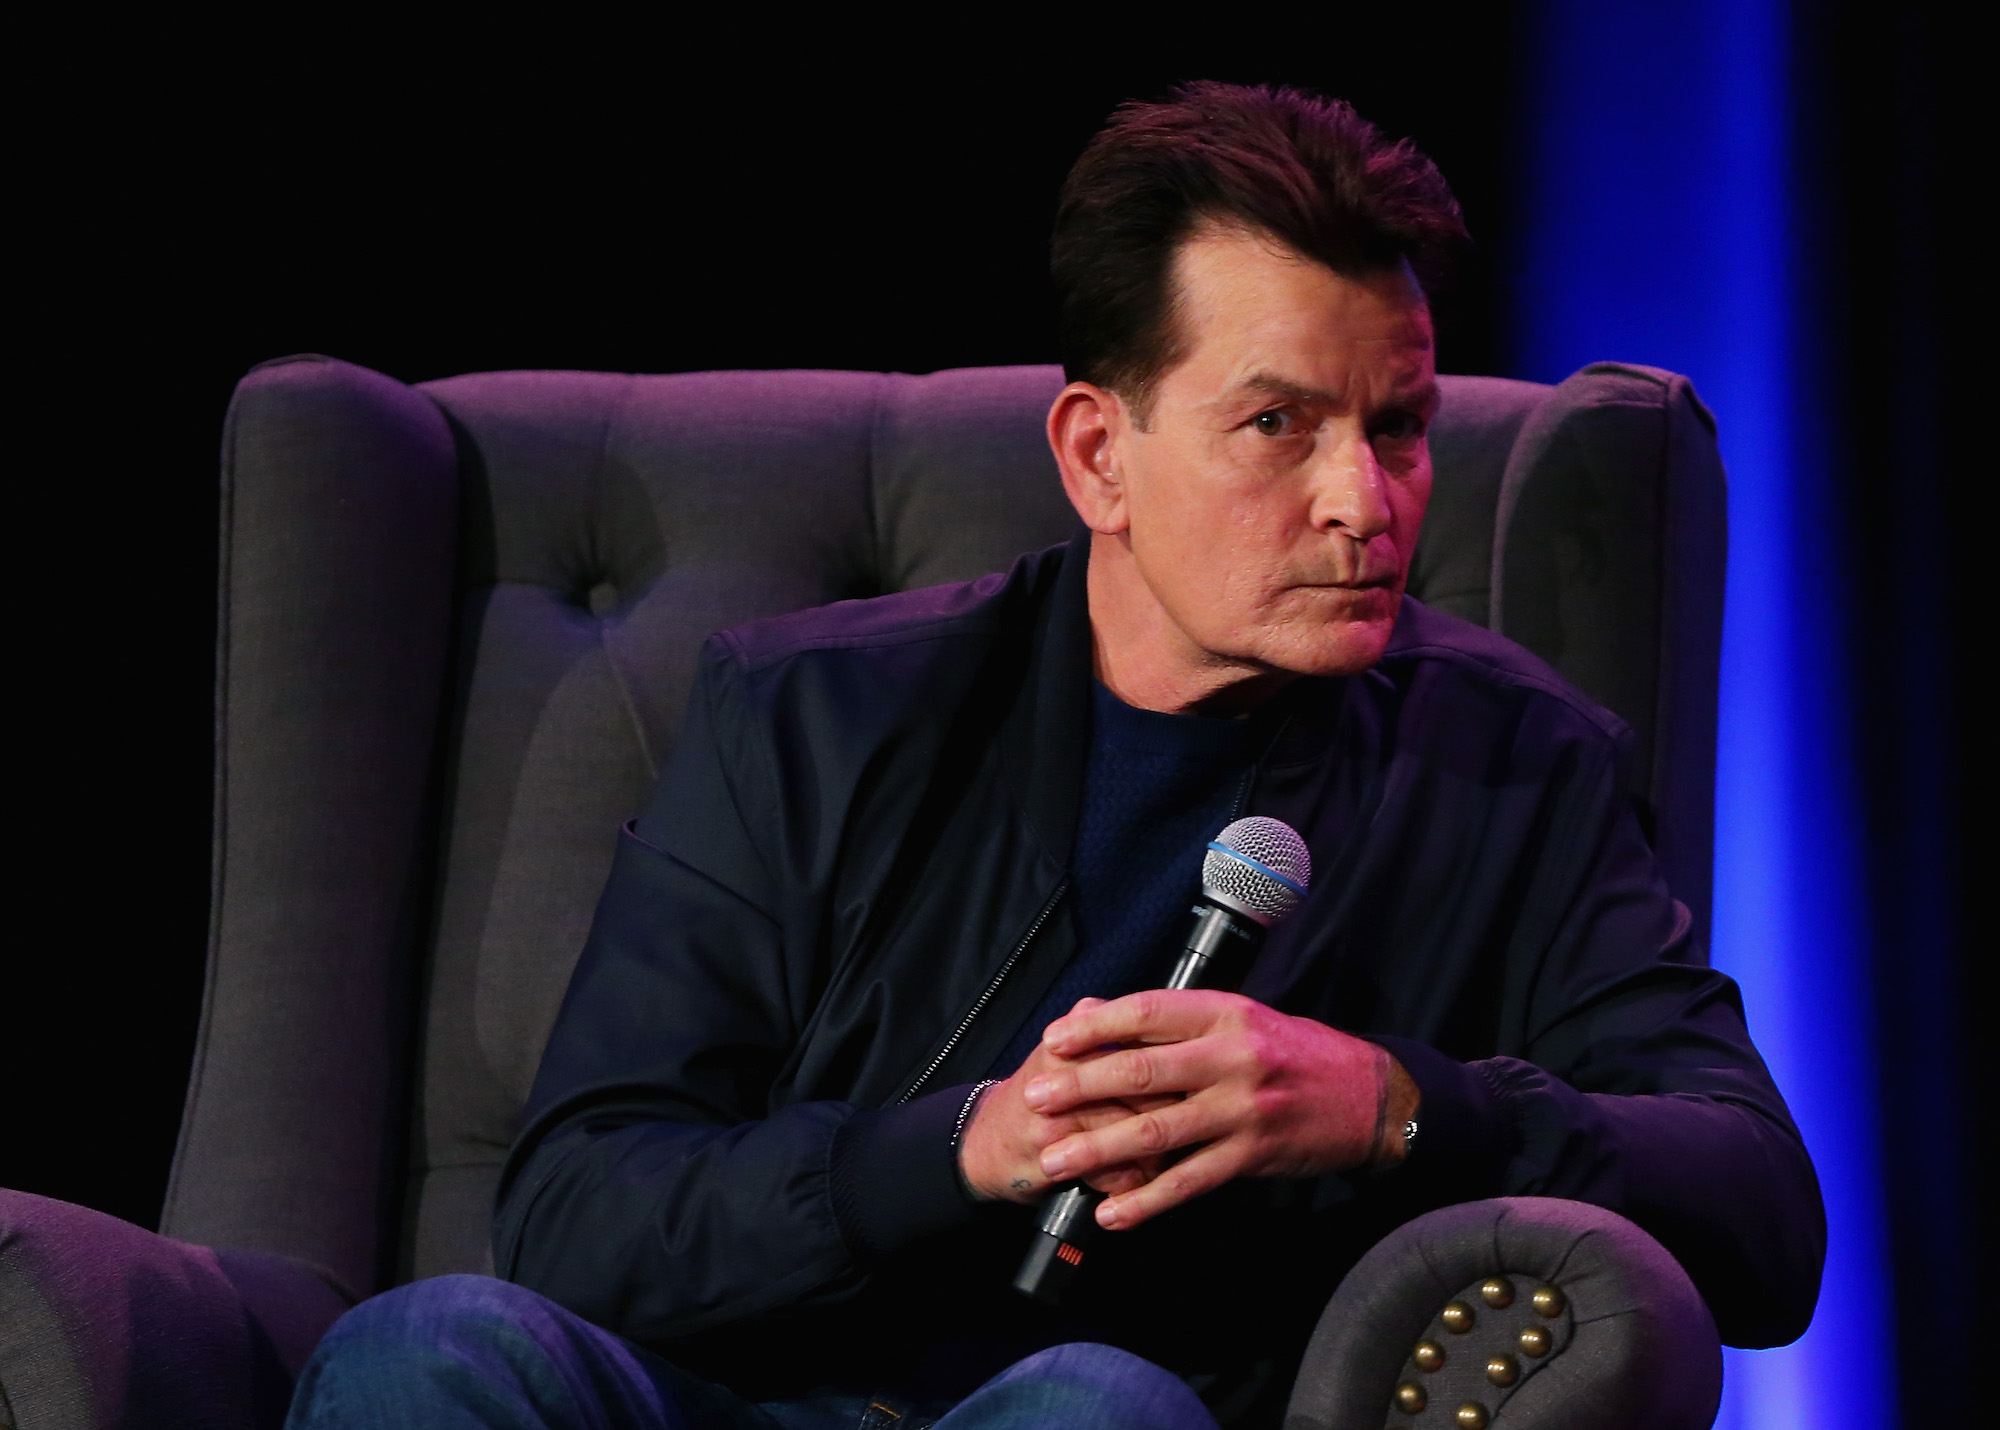 Charlie Sheen sitting, holding a microphone